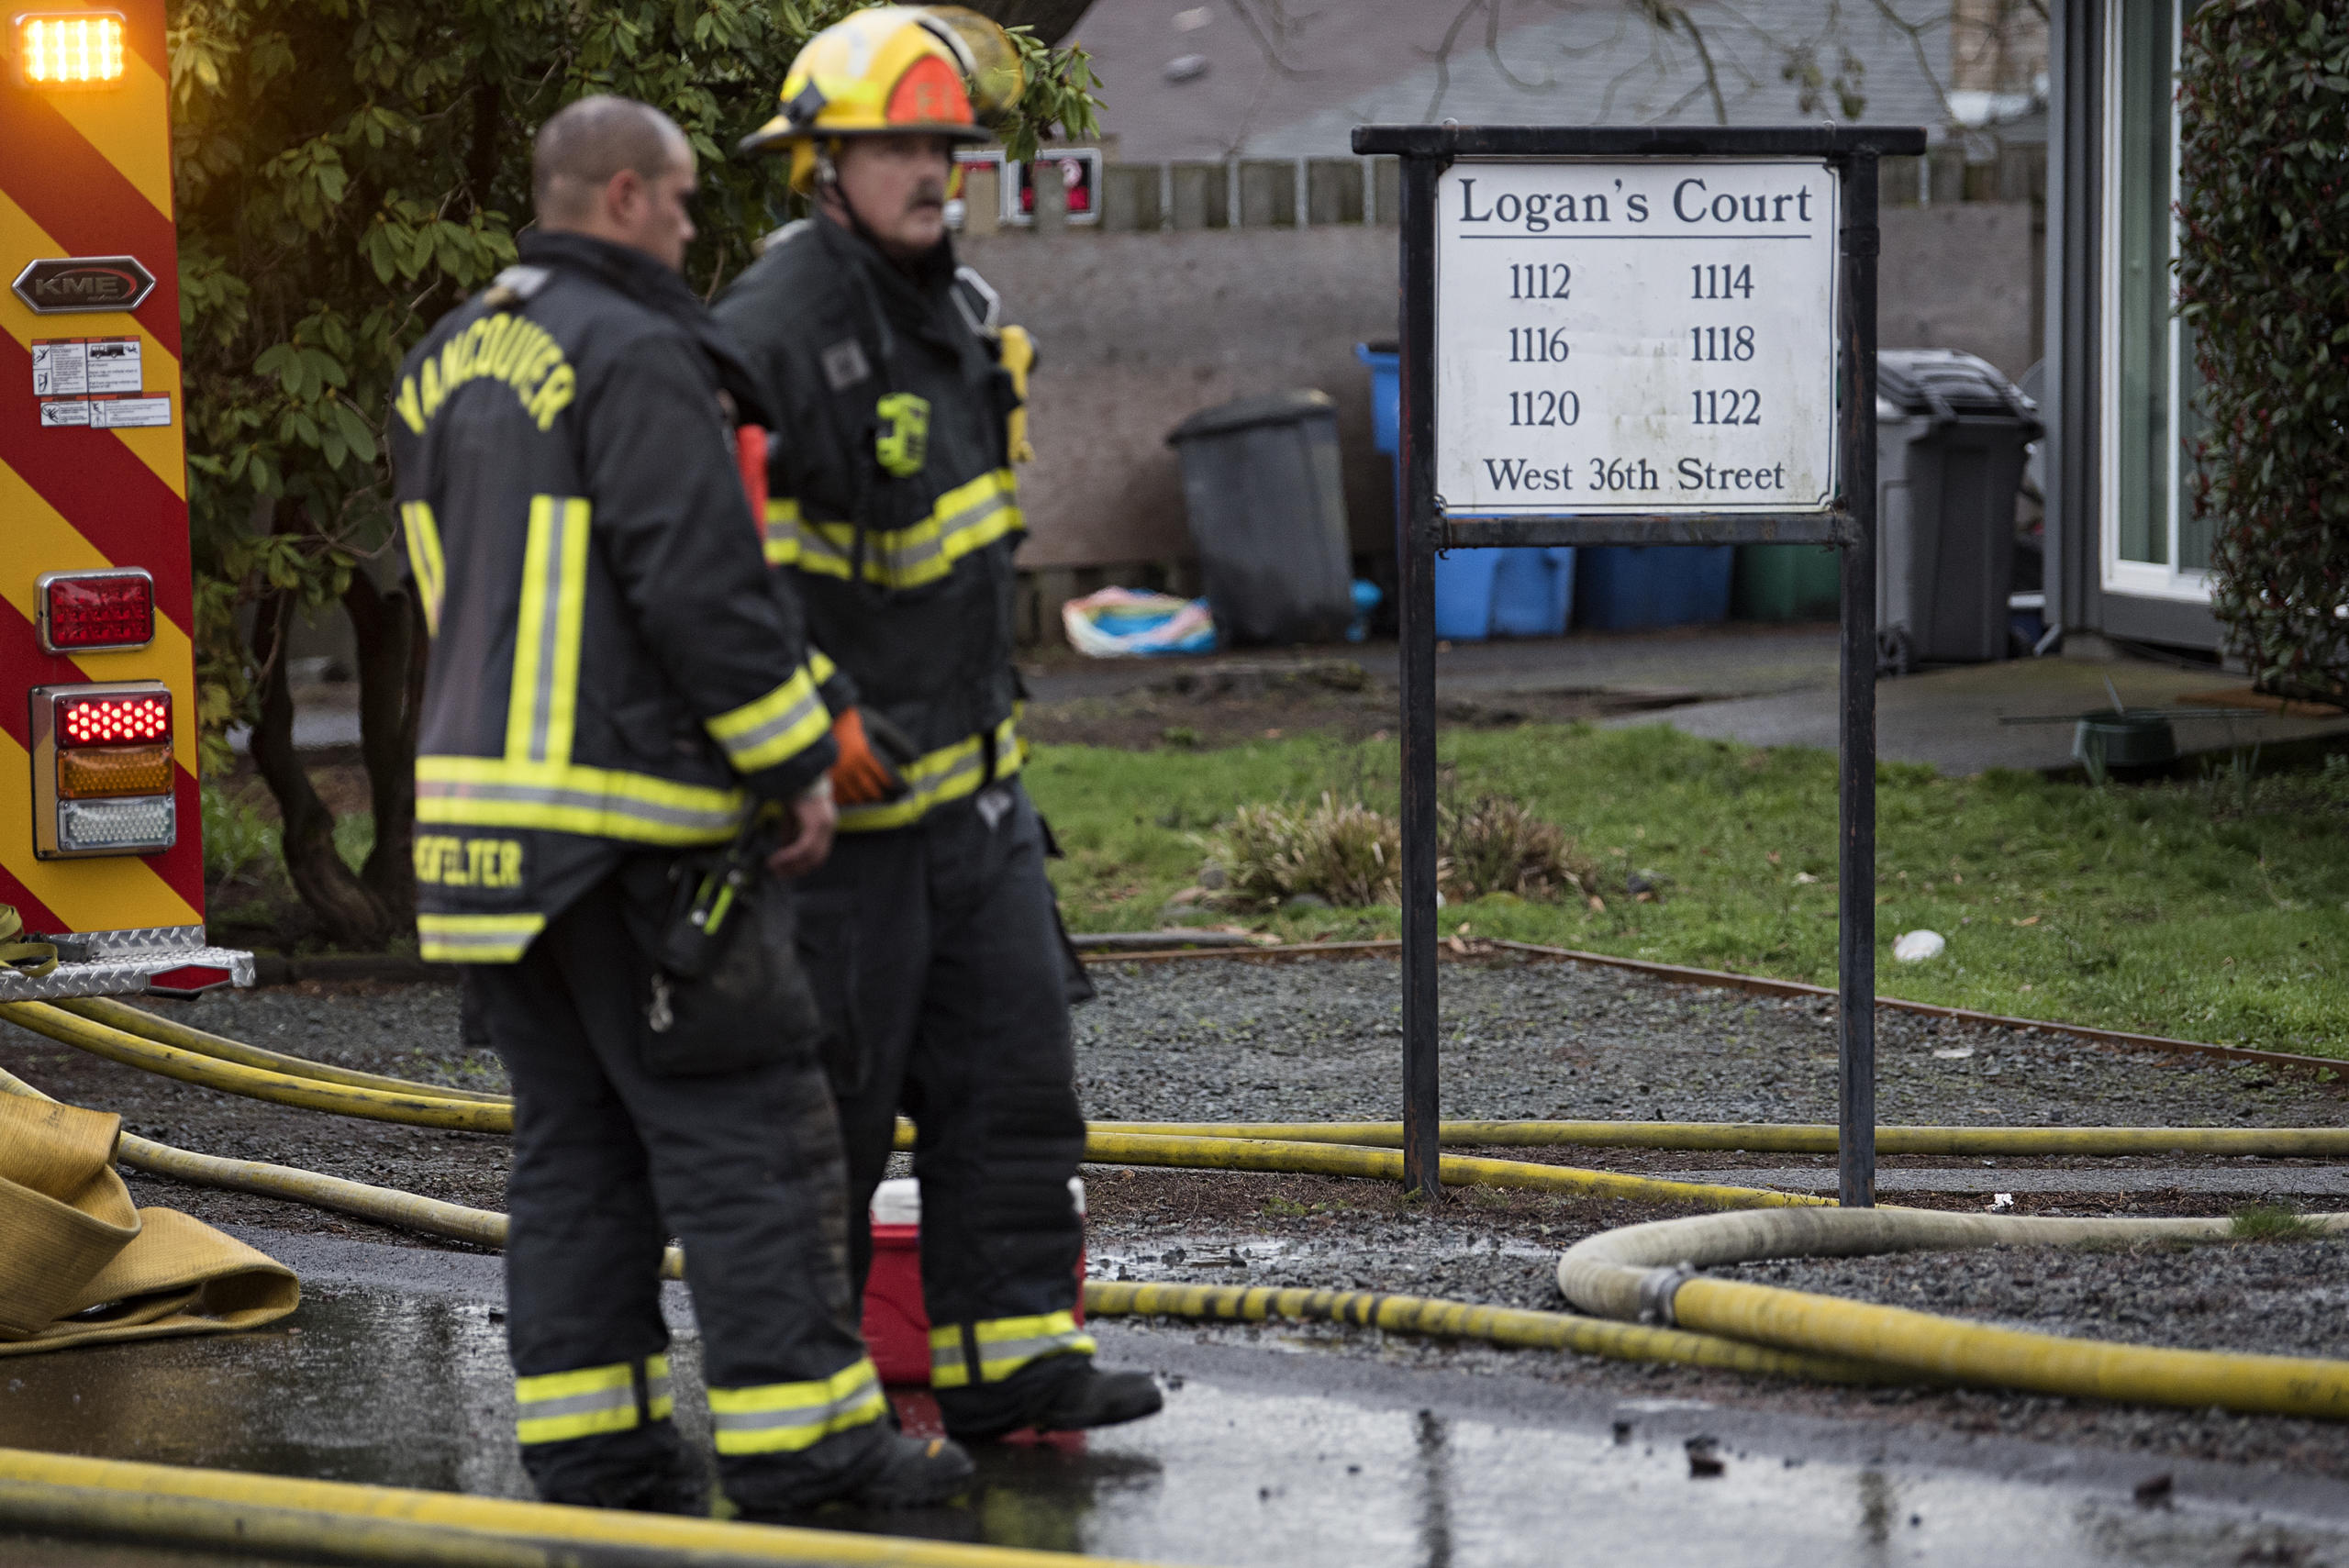 Firefighters work at the scene of a fire at Logan's Court duplex complex in Vancouver's Lincoln neighborhood on Monday afternoon, Feb. 22, 2021.